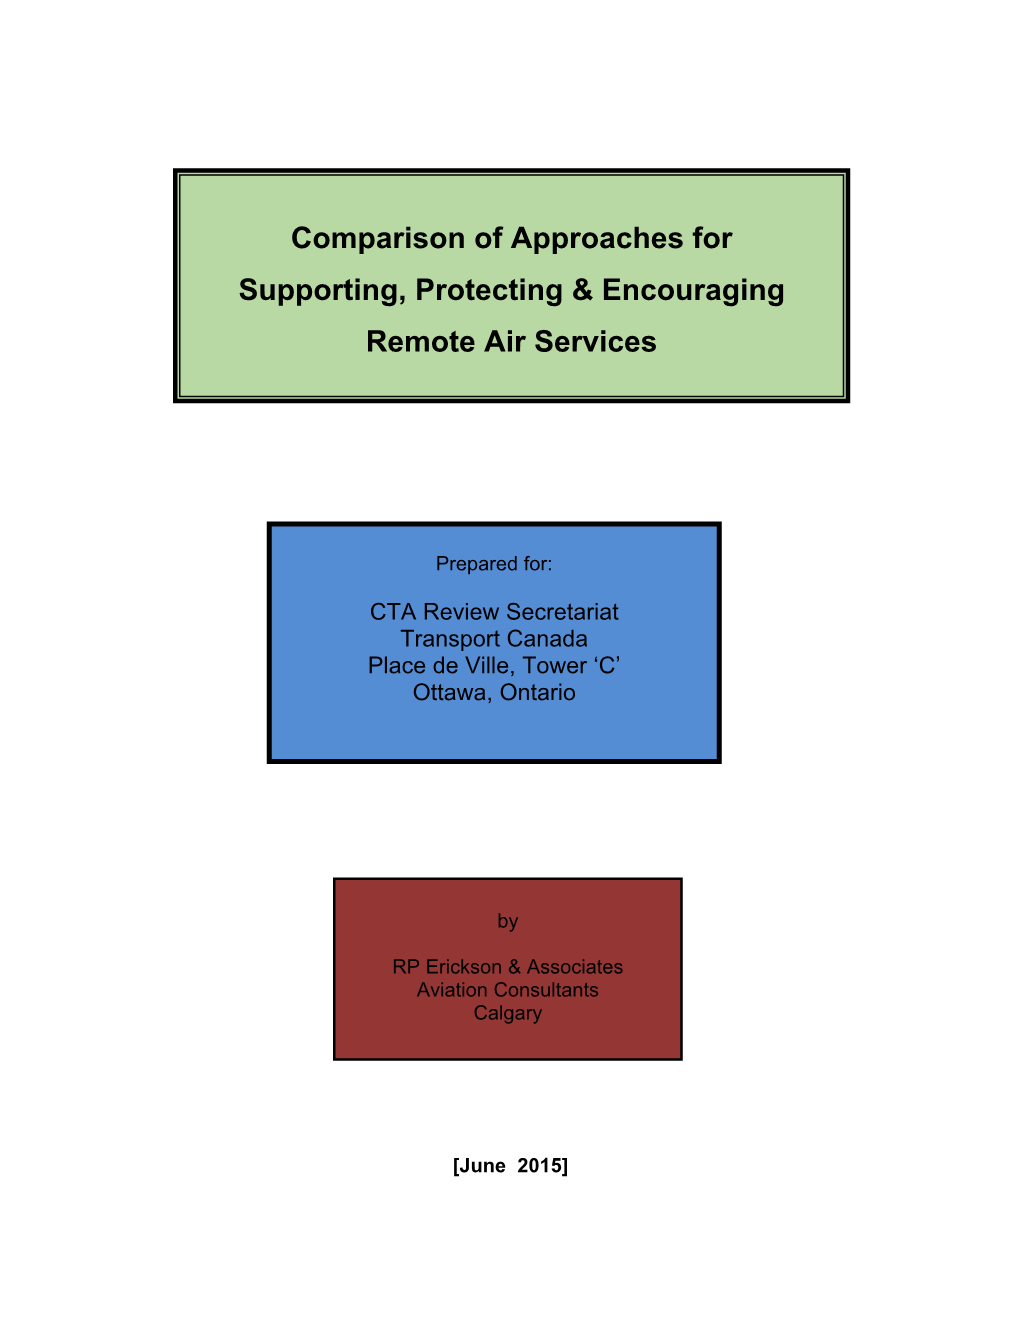 Comparison of Approaches for Supporting, Protecting & Encouraging Remote Air Services